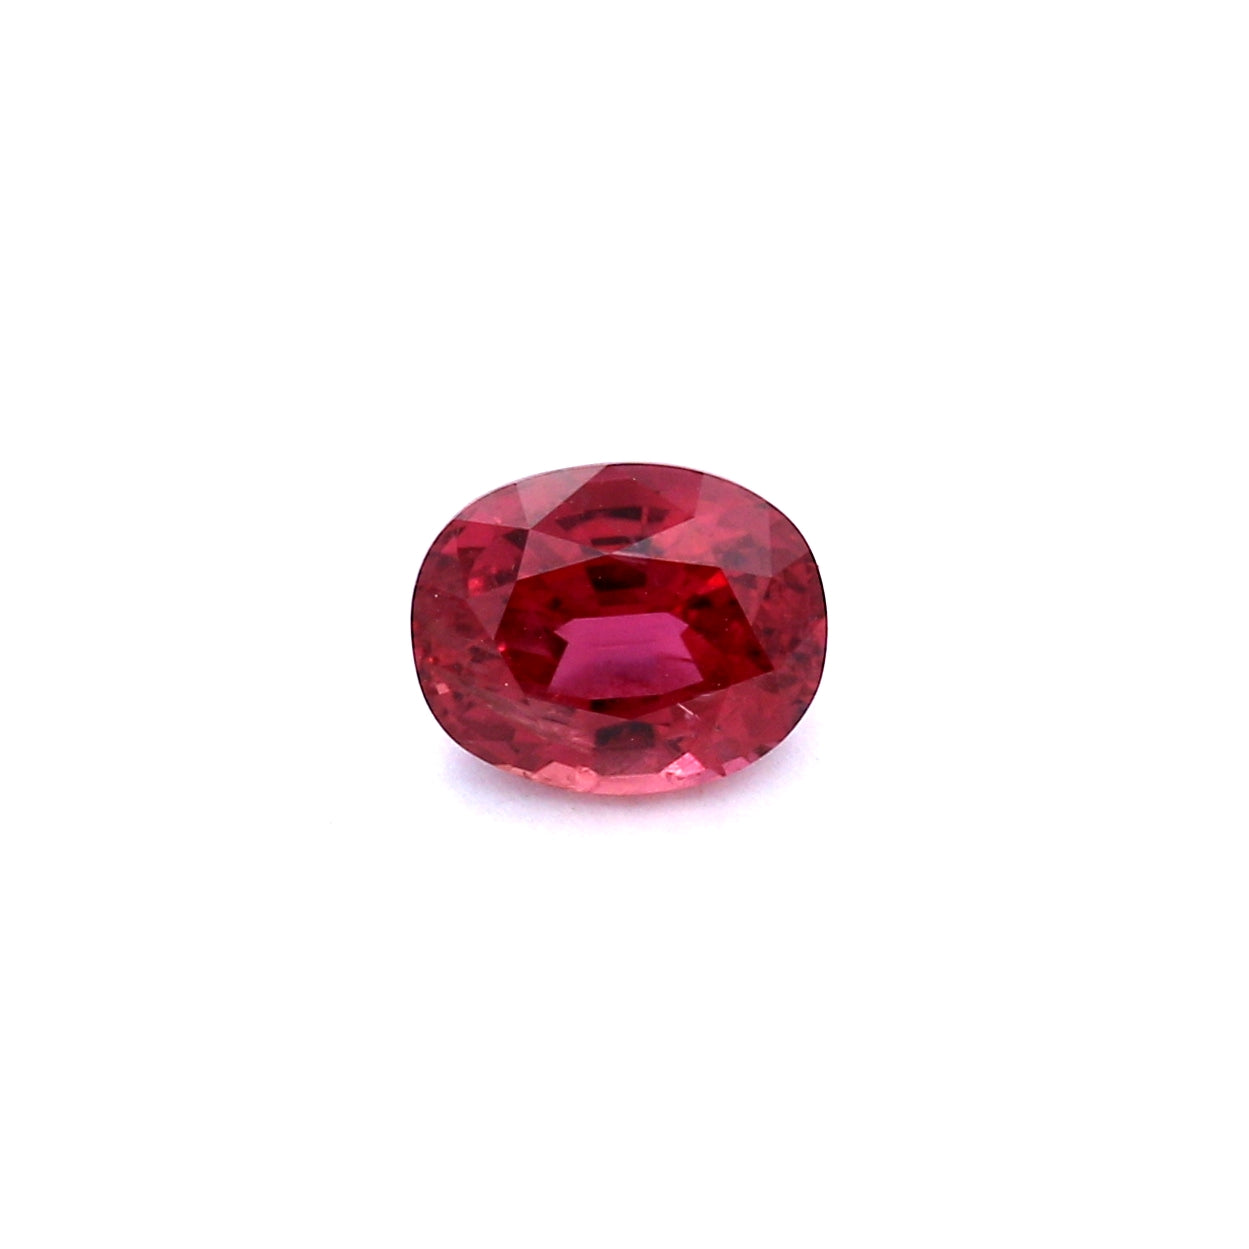 1.61ct Pinkish Red, Oval Ruby, No Heat, Thailand - 7.29 x 5.86 x 4.31mm